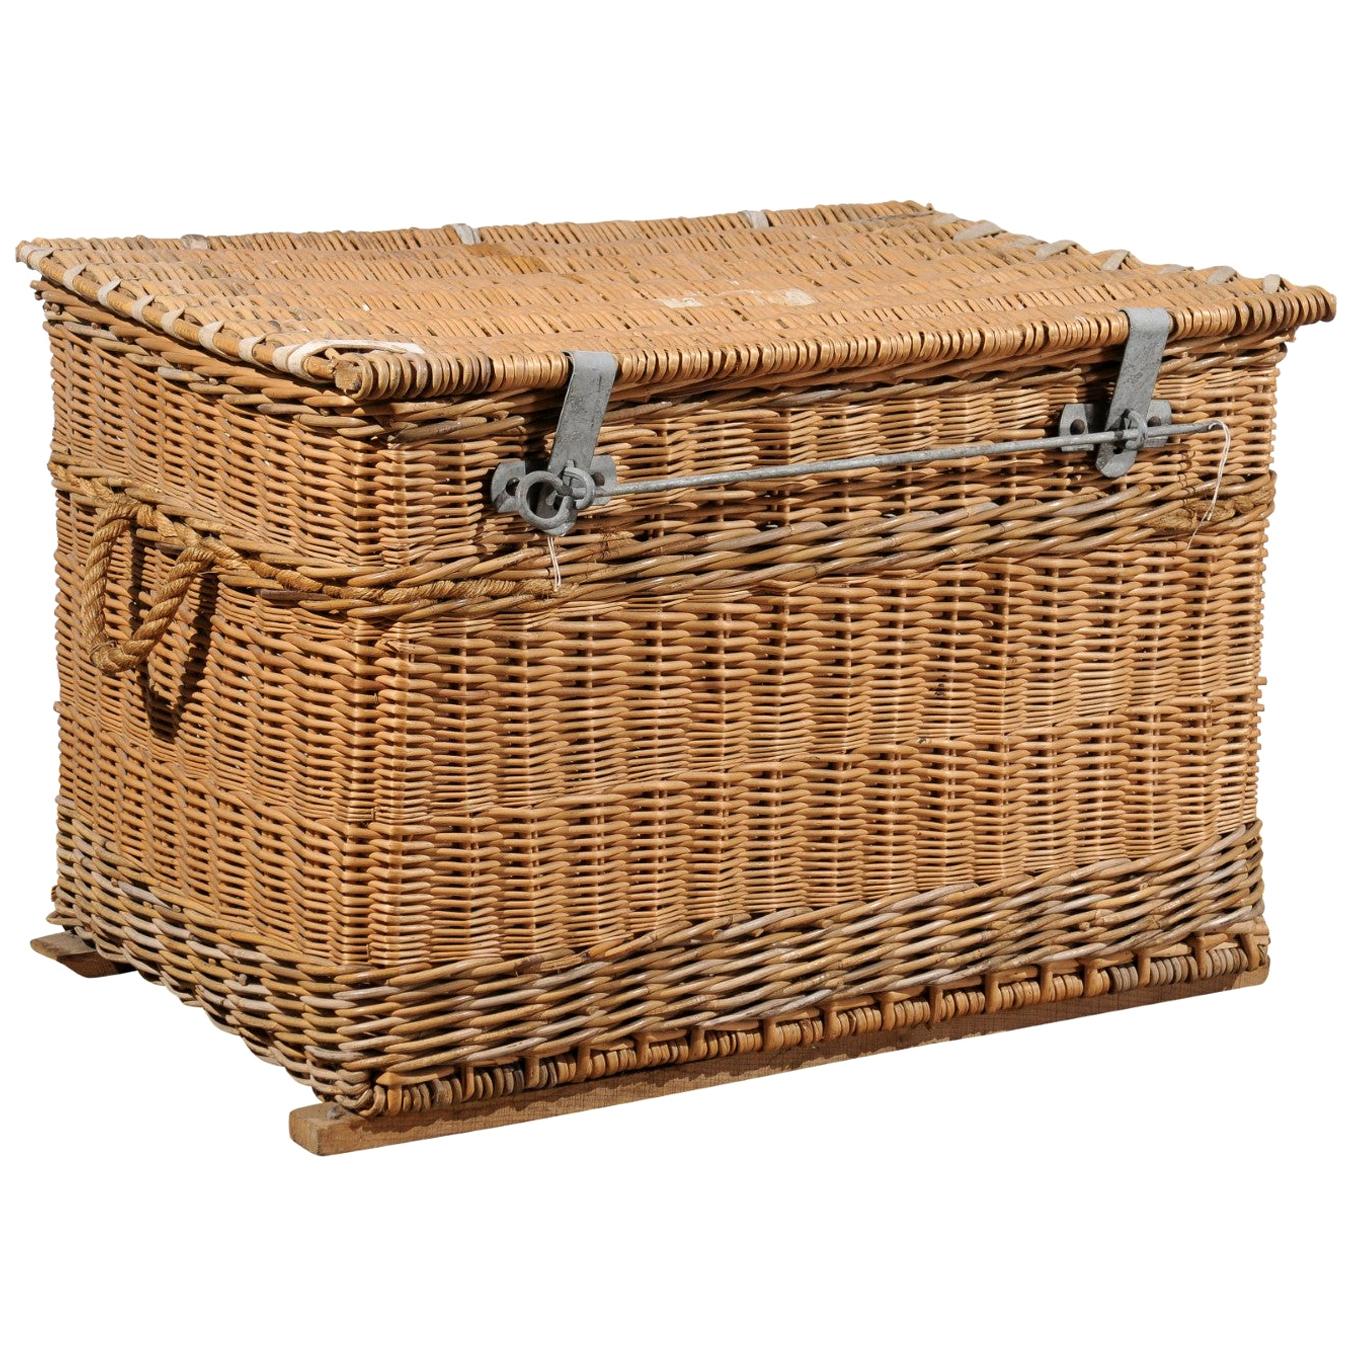 Rustic French 19th Century Wicker Trunk with Metal Hardware and Handles